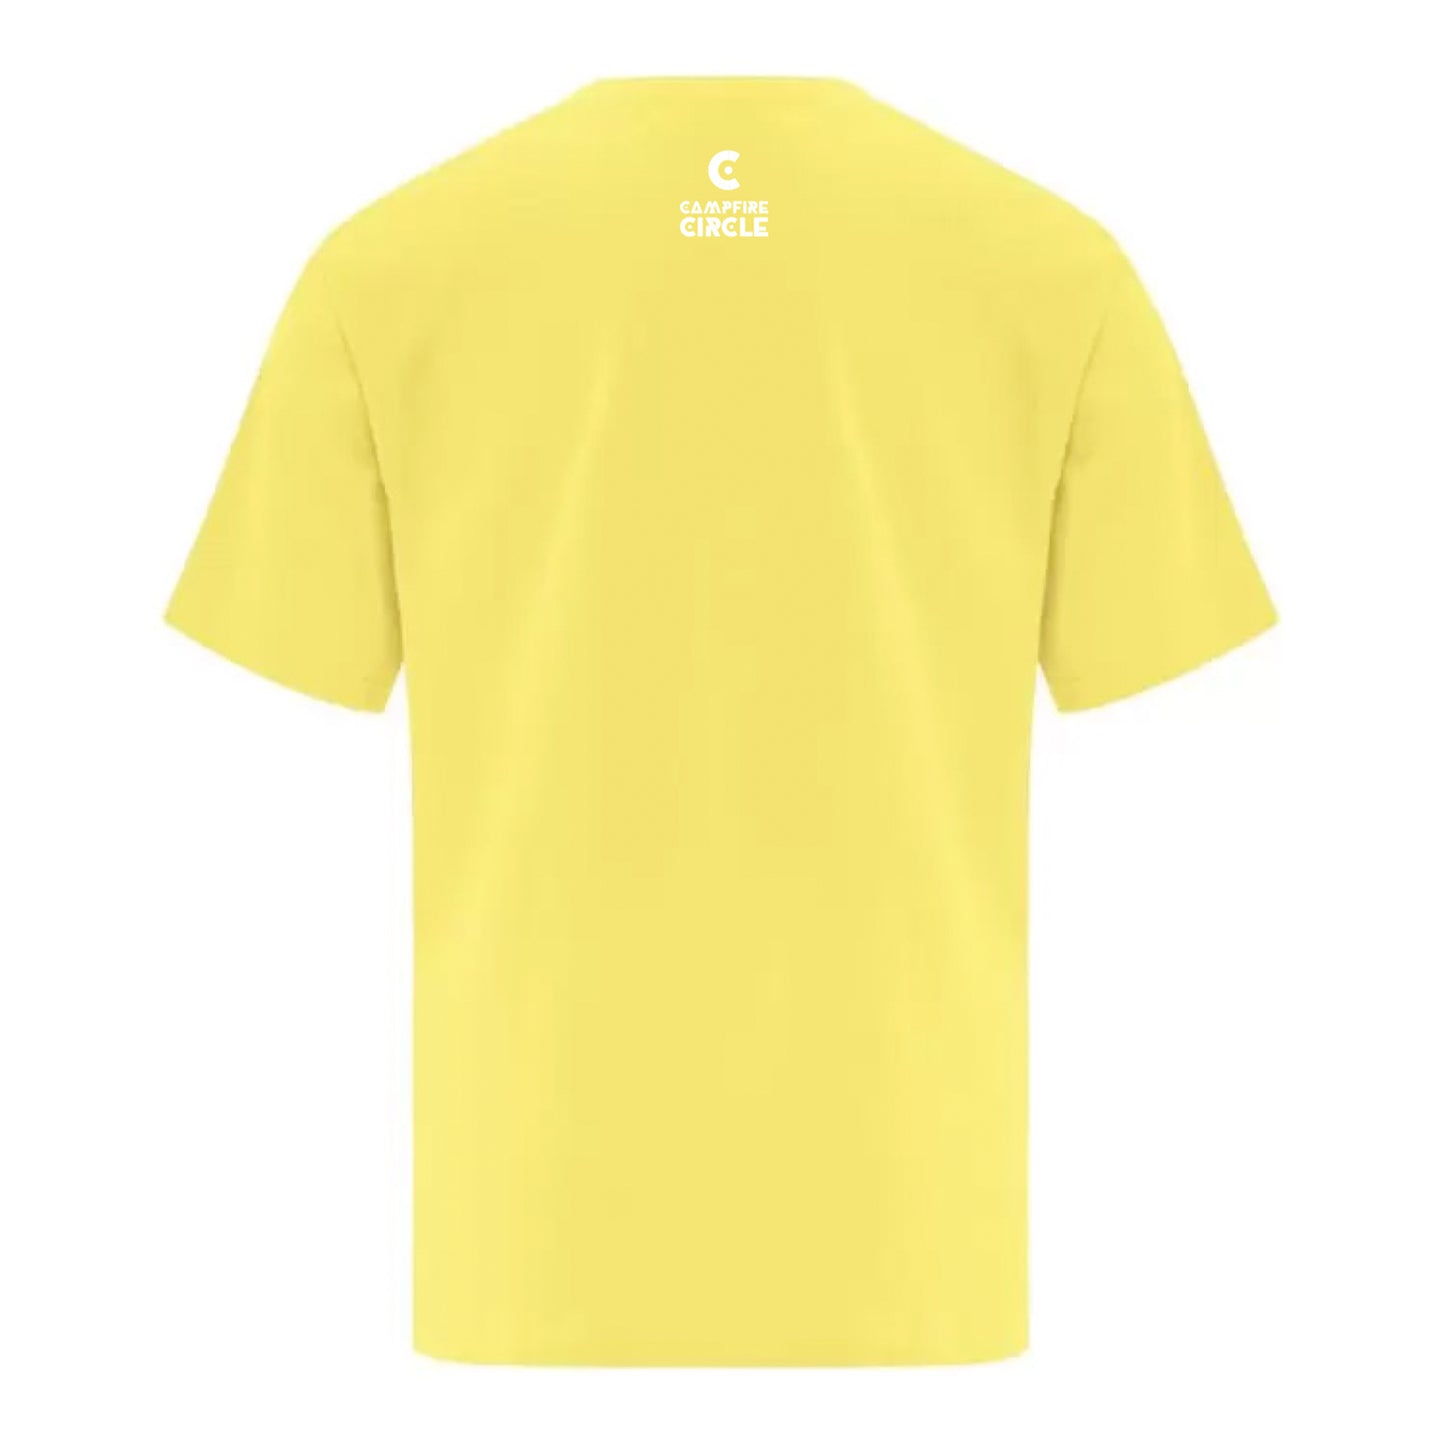 Happy Campers Yellow Youth T-Shirt